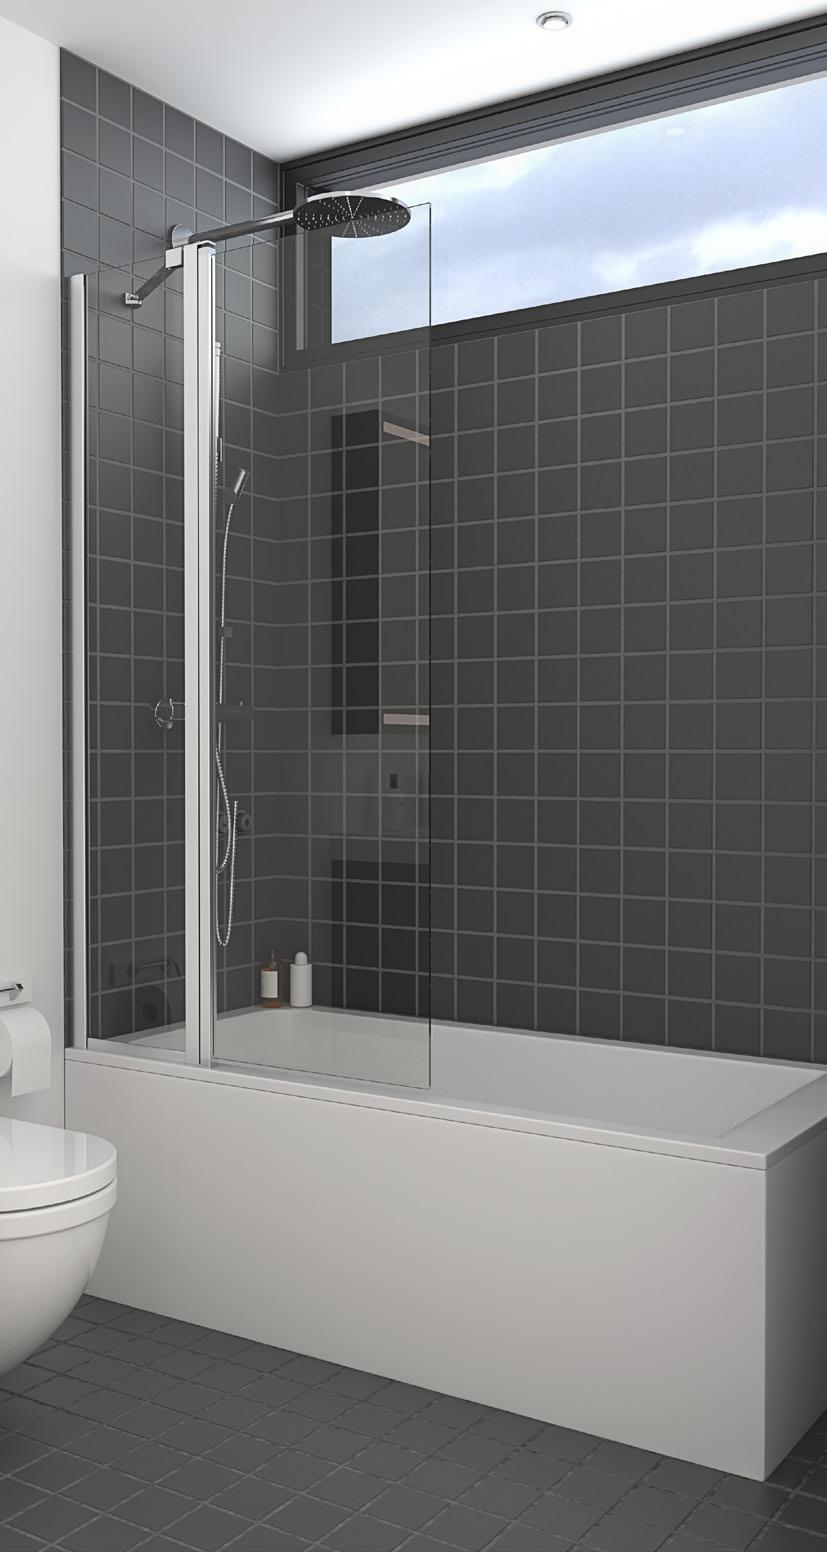 BATH PANEL WITH HINGED DOOR 155 X 90 CM Just because the bathroom is small, it does not have to feel that way. Say goodbye to the shower curtain and choose a MATCH bath panel instead.